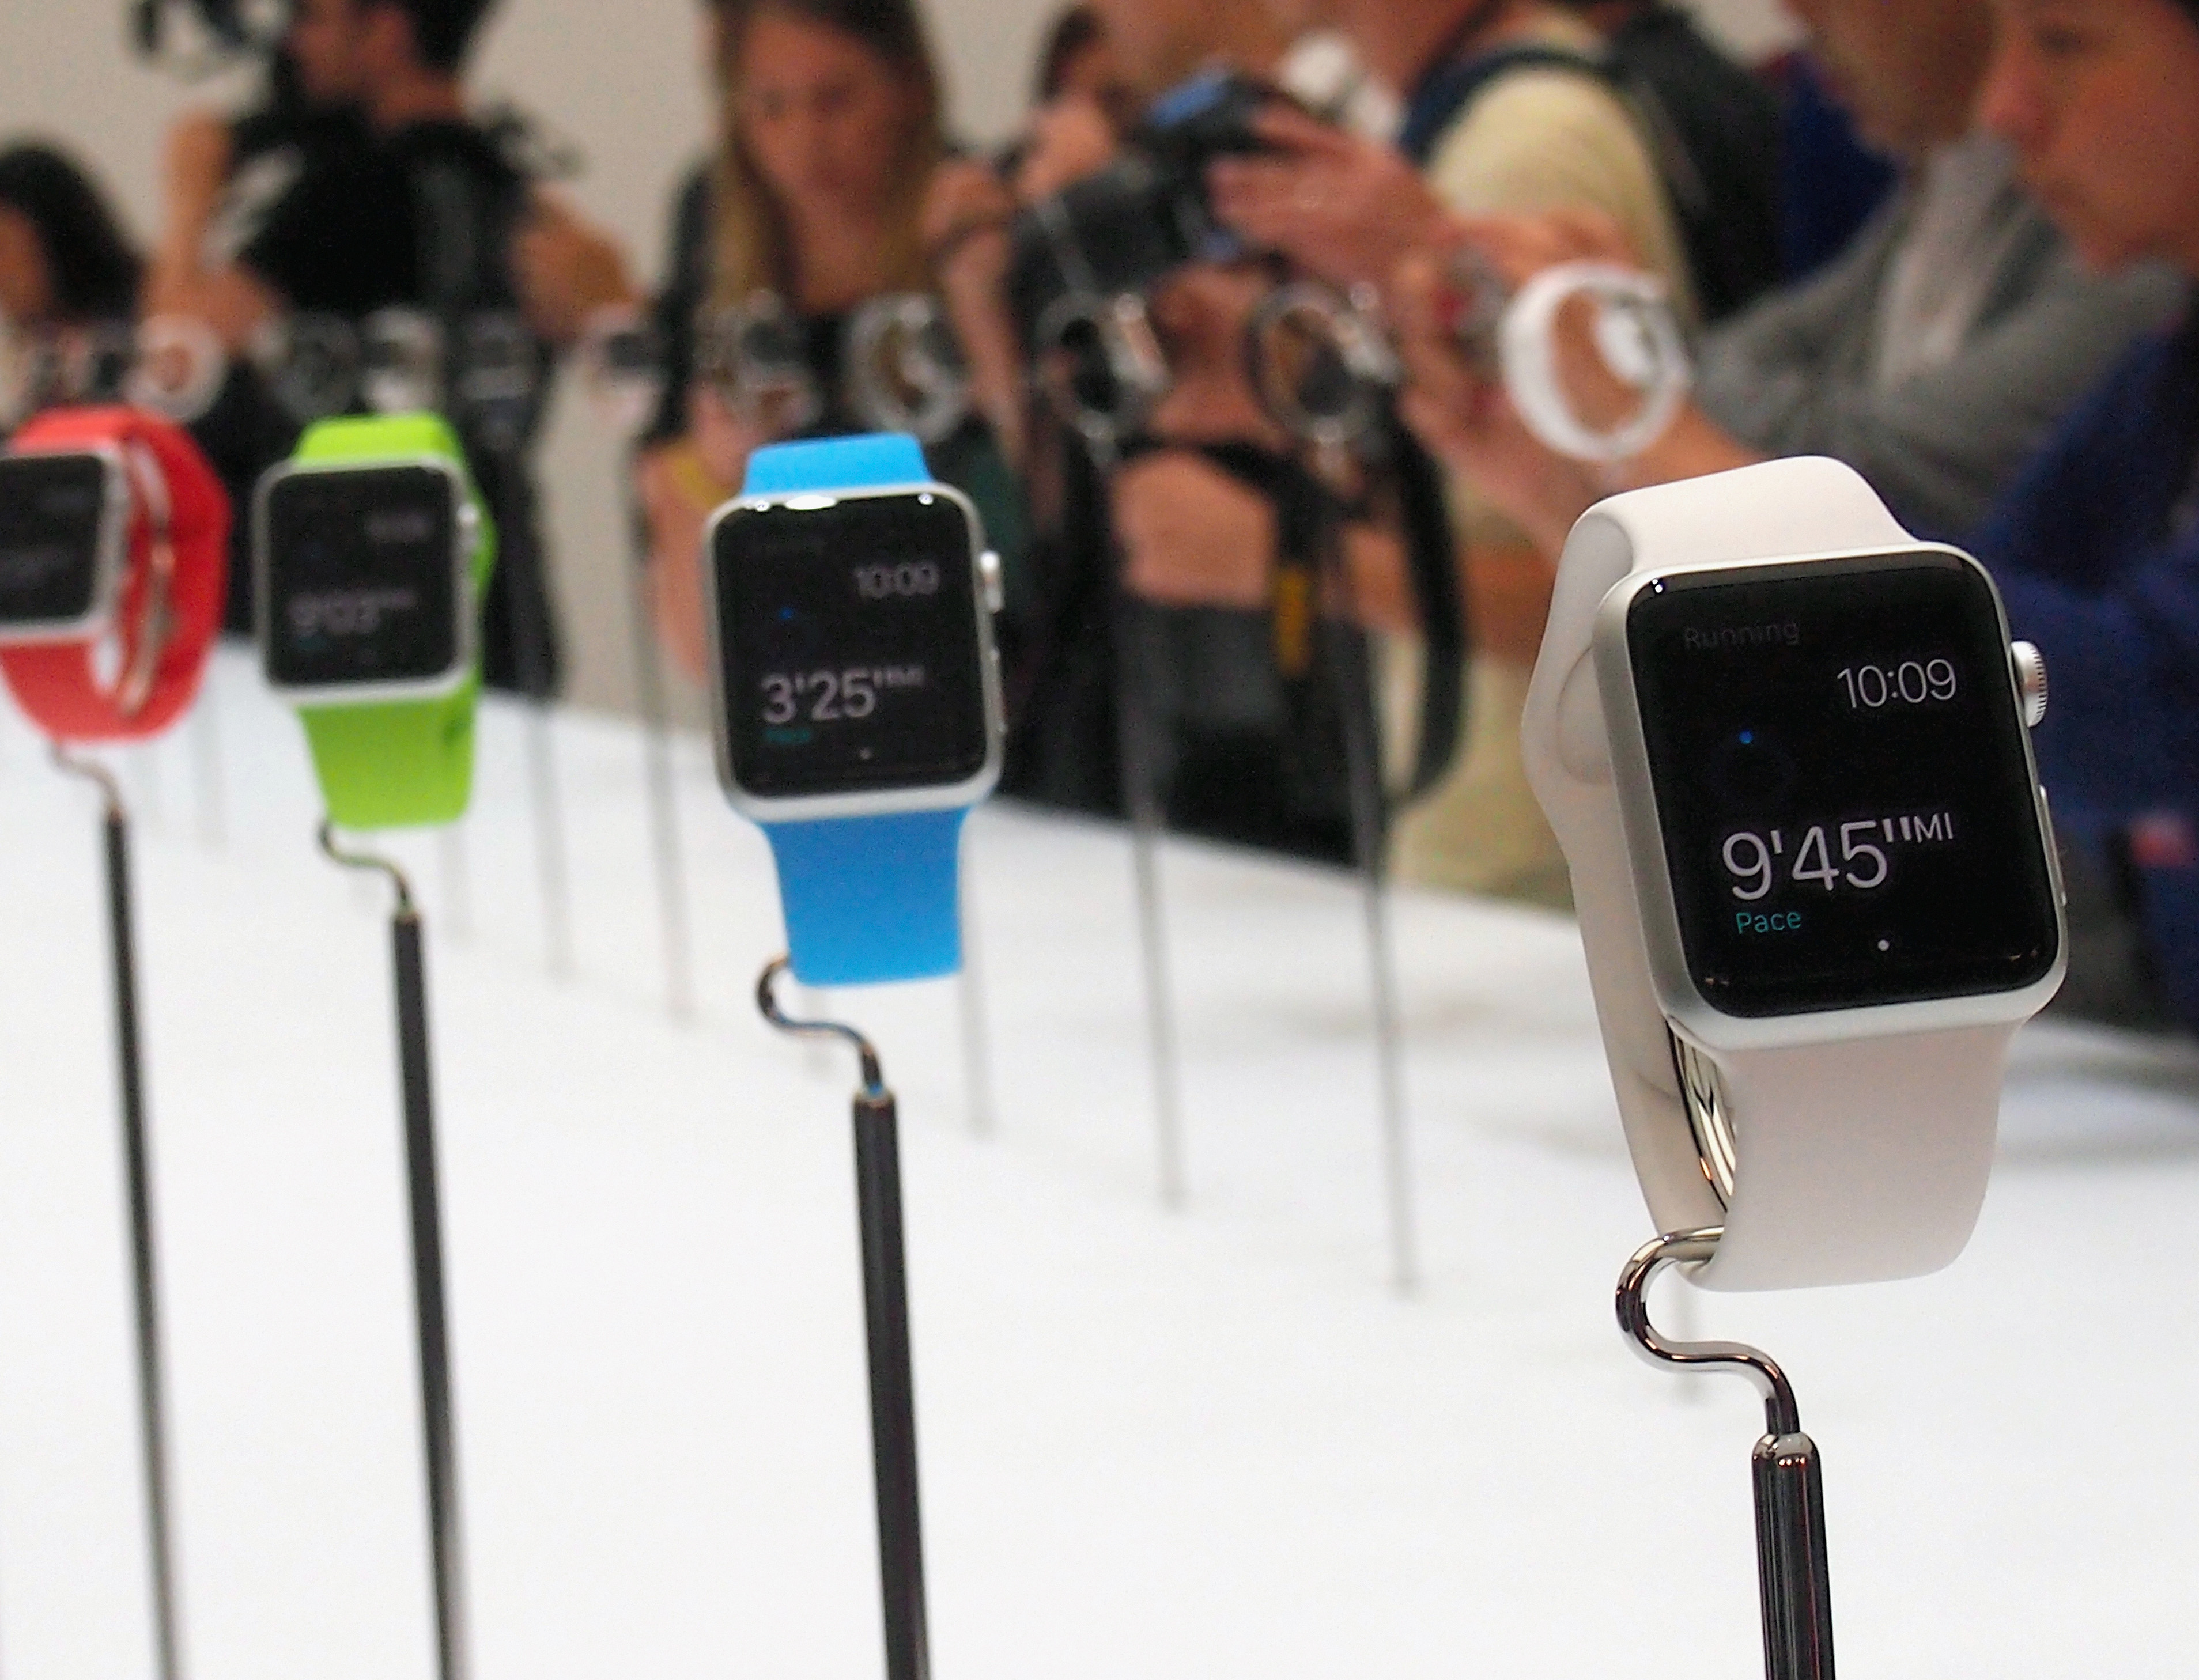 Apple Watch are displayed during an Apple special event at the Flint Center for the Performing Arts on September 9, 2014 in Cupertino, California. (The Asahi Shimbun&mdash;Getty Images)